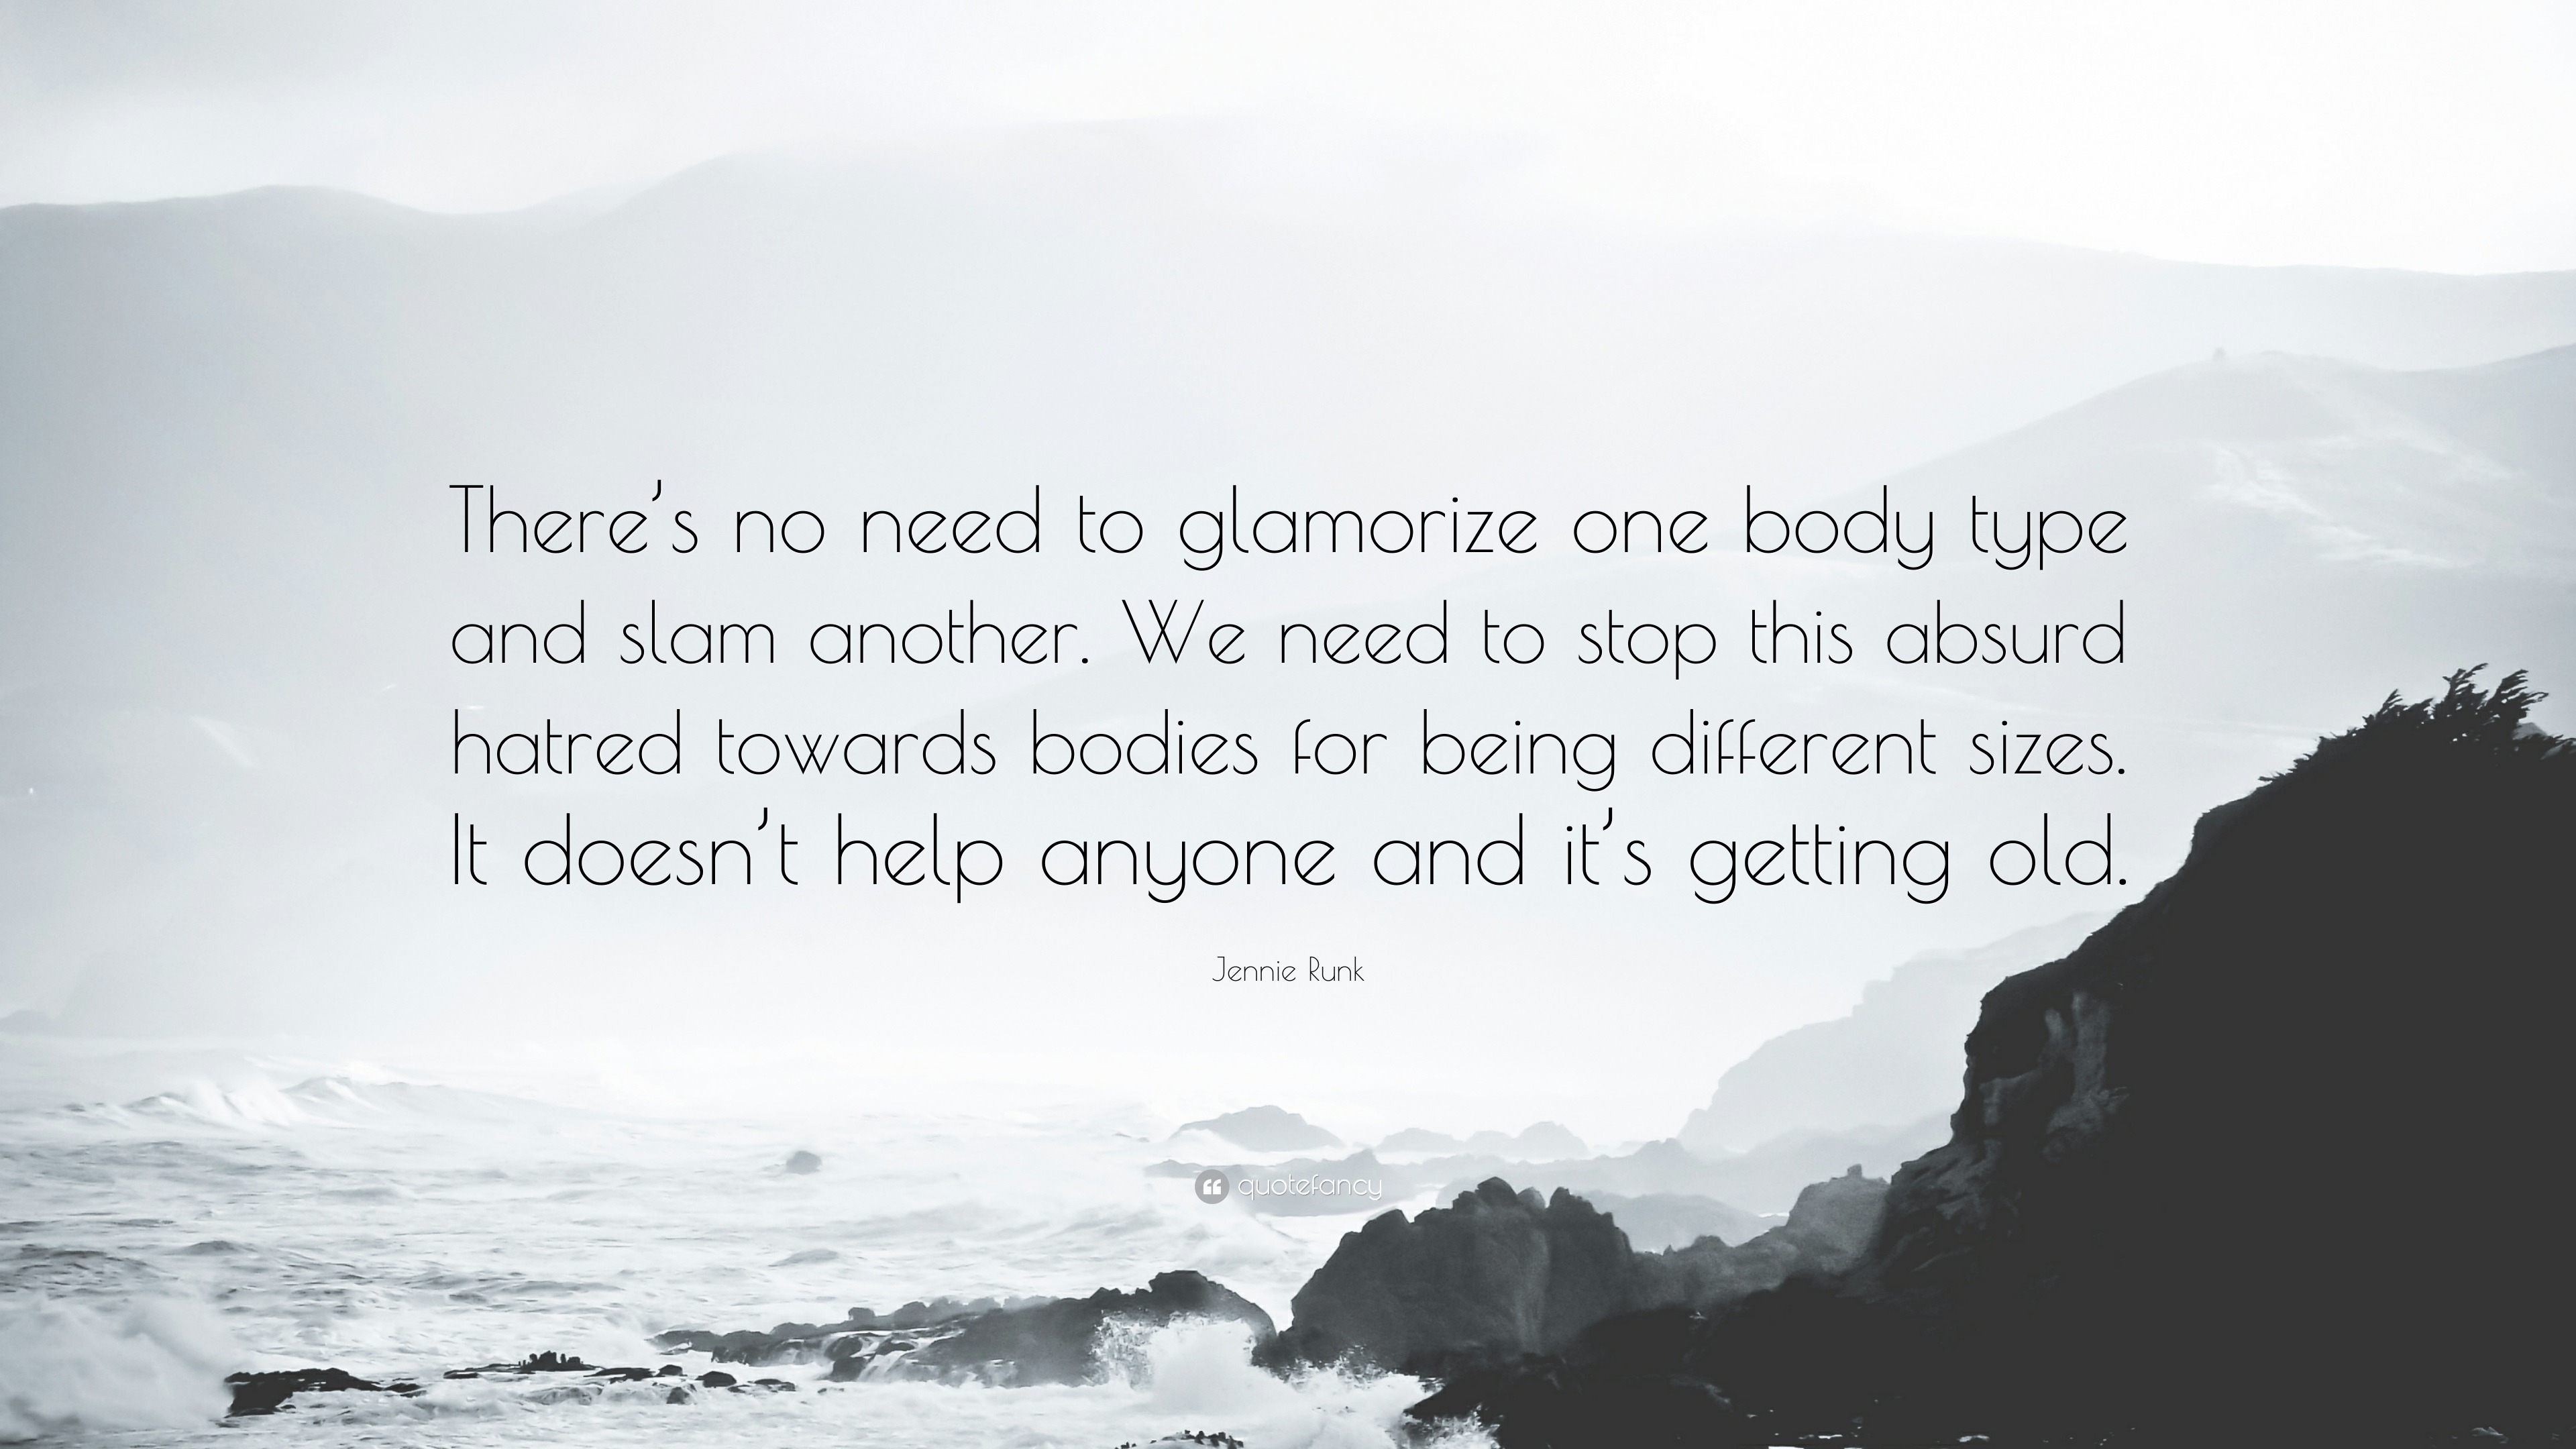 https://quotefancy.com/media/wallpaper/3840x2160/1646676-Jennie-Runk-Quote-There-s-no-need-to-glamorize-one-body-type-and.jpg